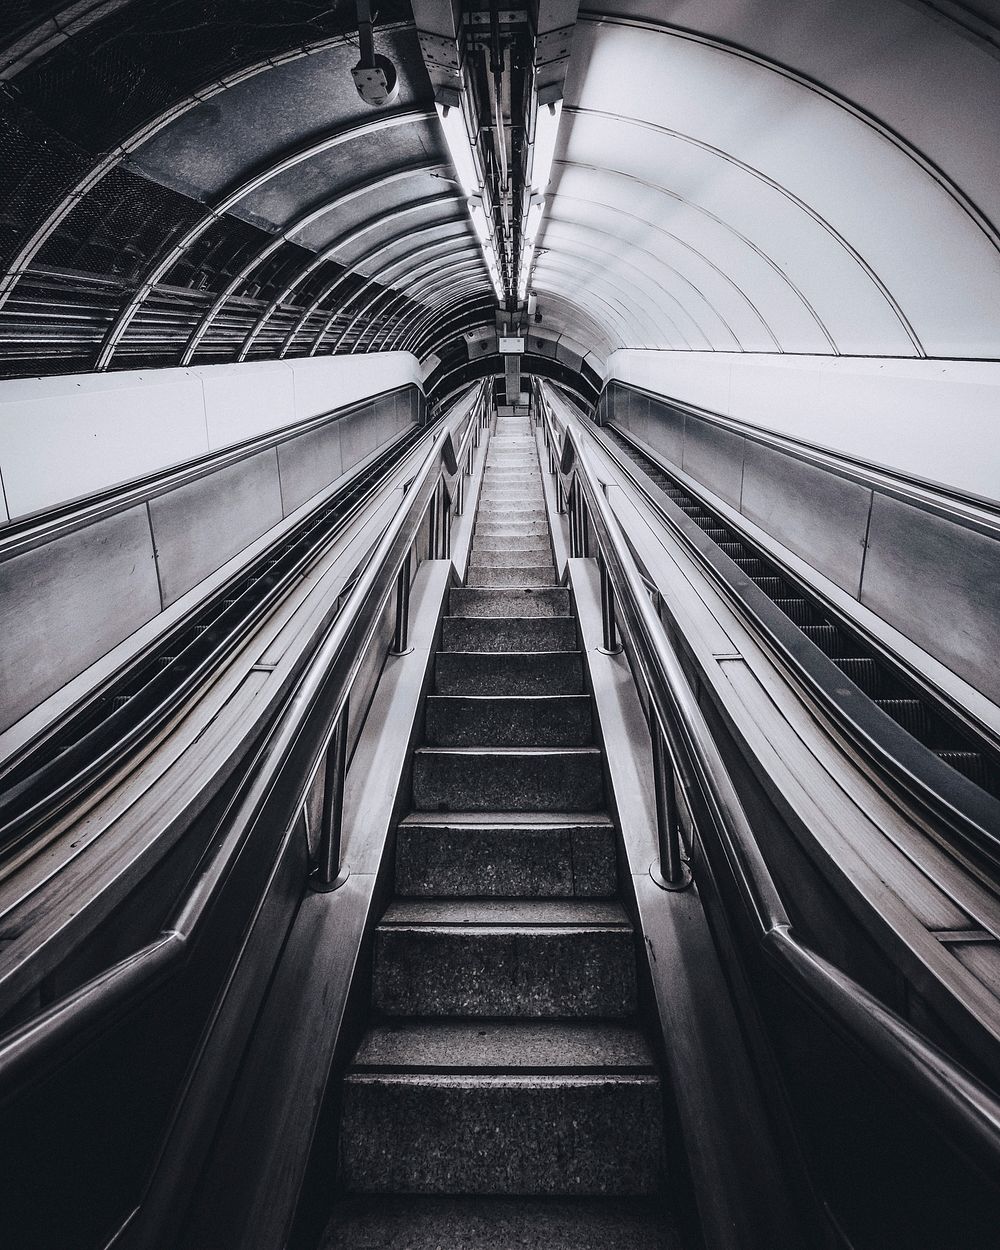 An empty staircase and two escalators in a tunnel in London. Original public domain image from Wikimedia Commons